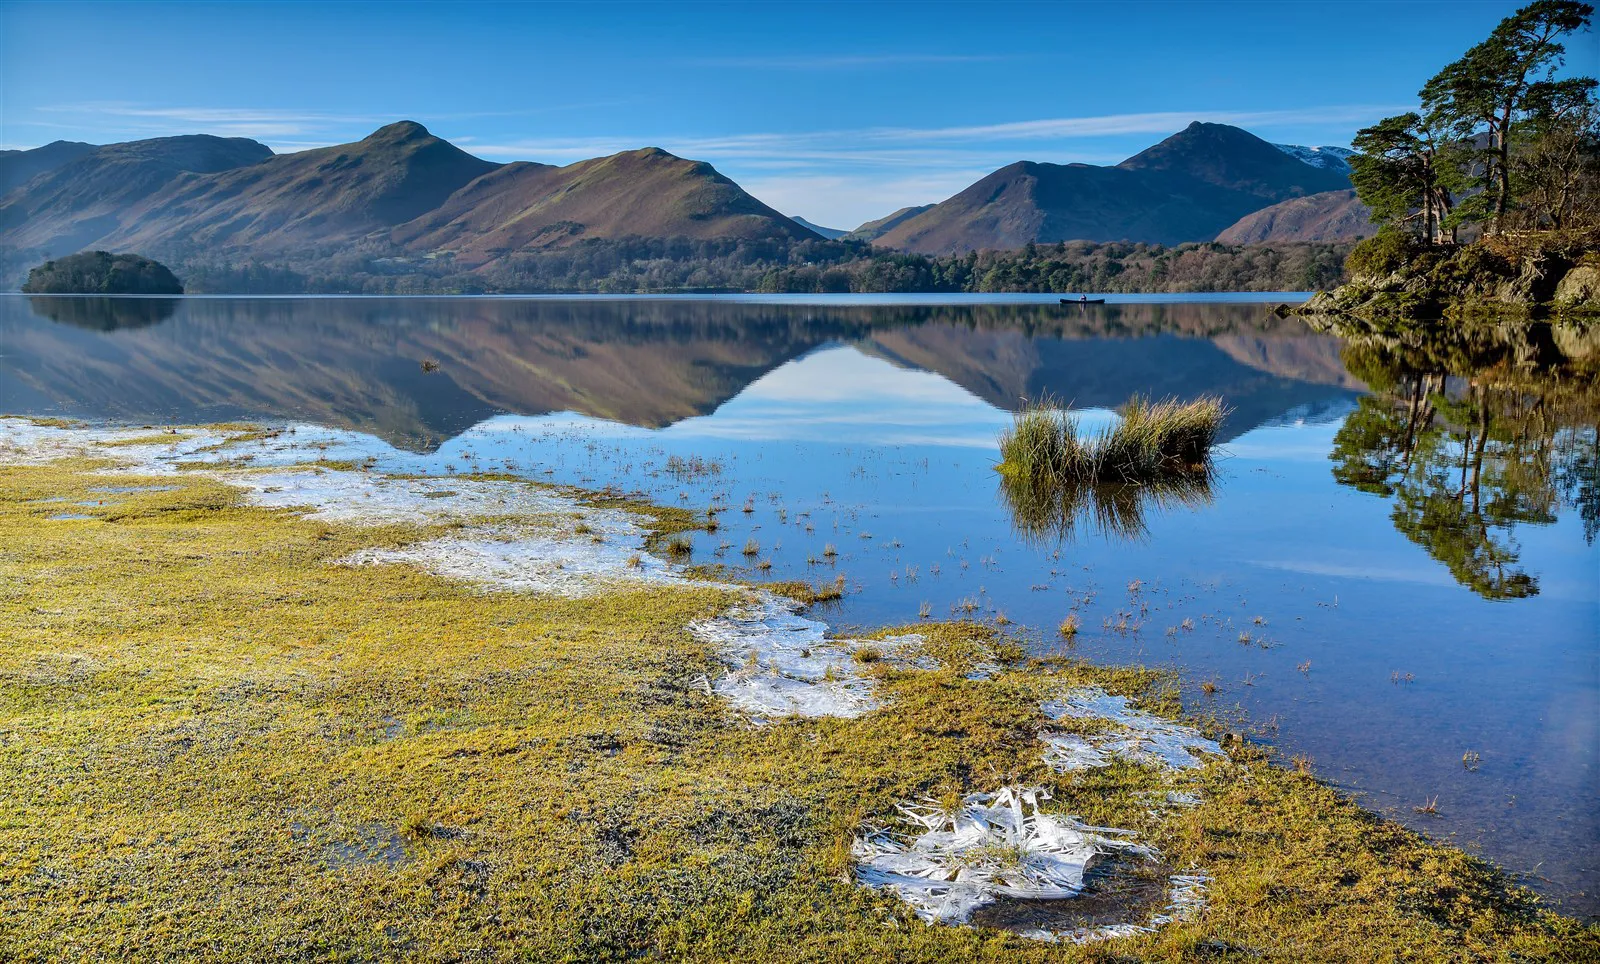 Woodrow's top ten national parks every Brit should visit